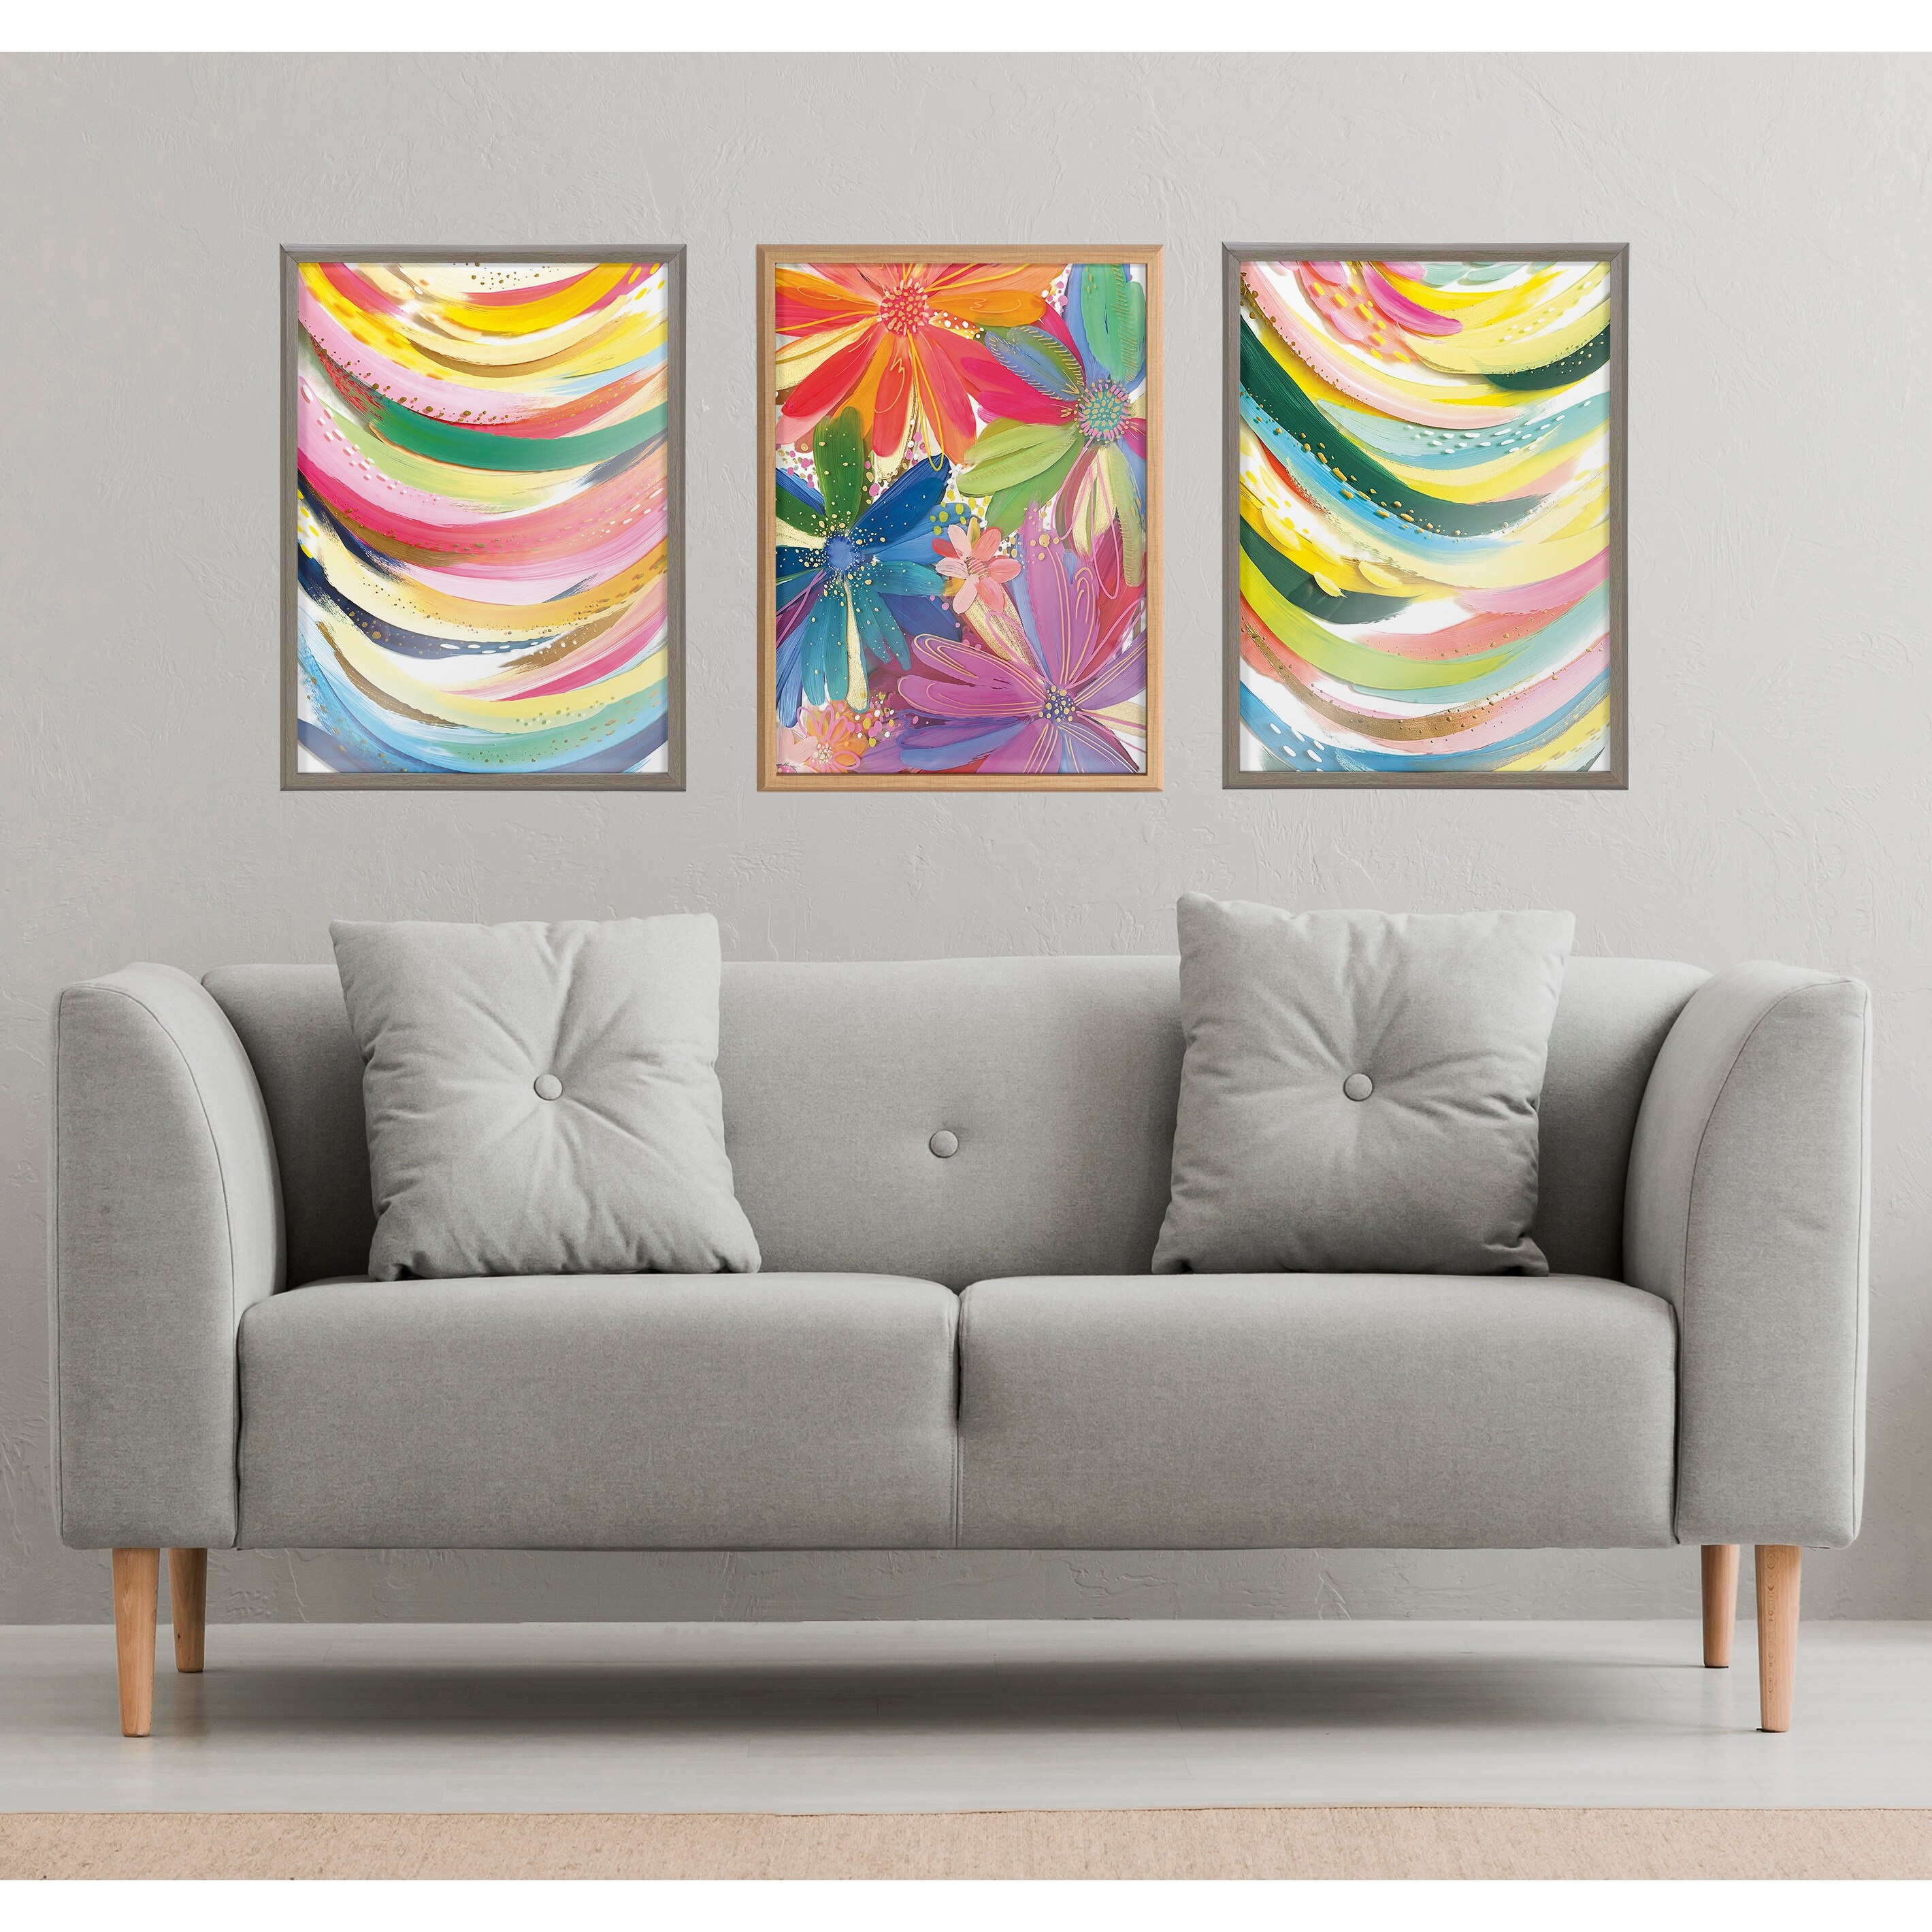 Kate and Laurel Blake 18x24 Brushstrokes Printed Glass by Jessi Raulet  Bed Bath  Beyond 34740709